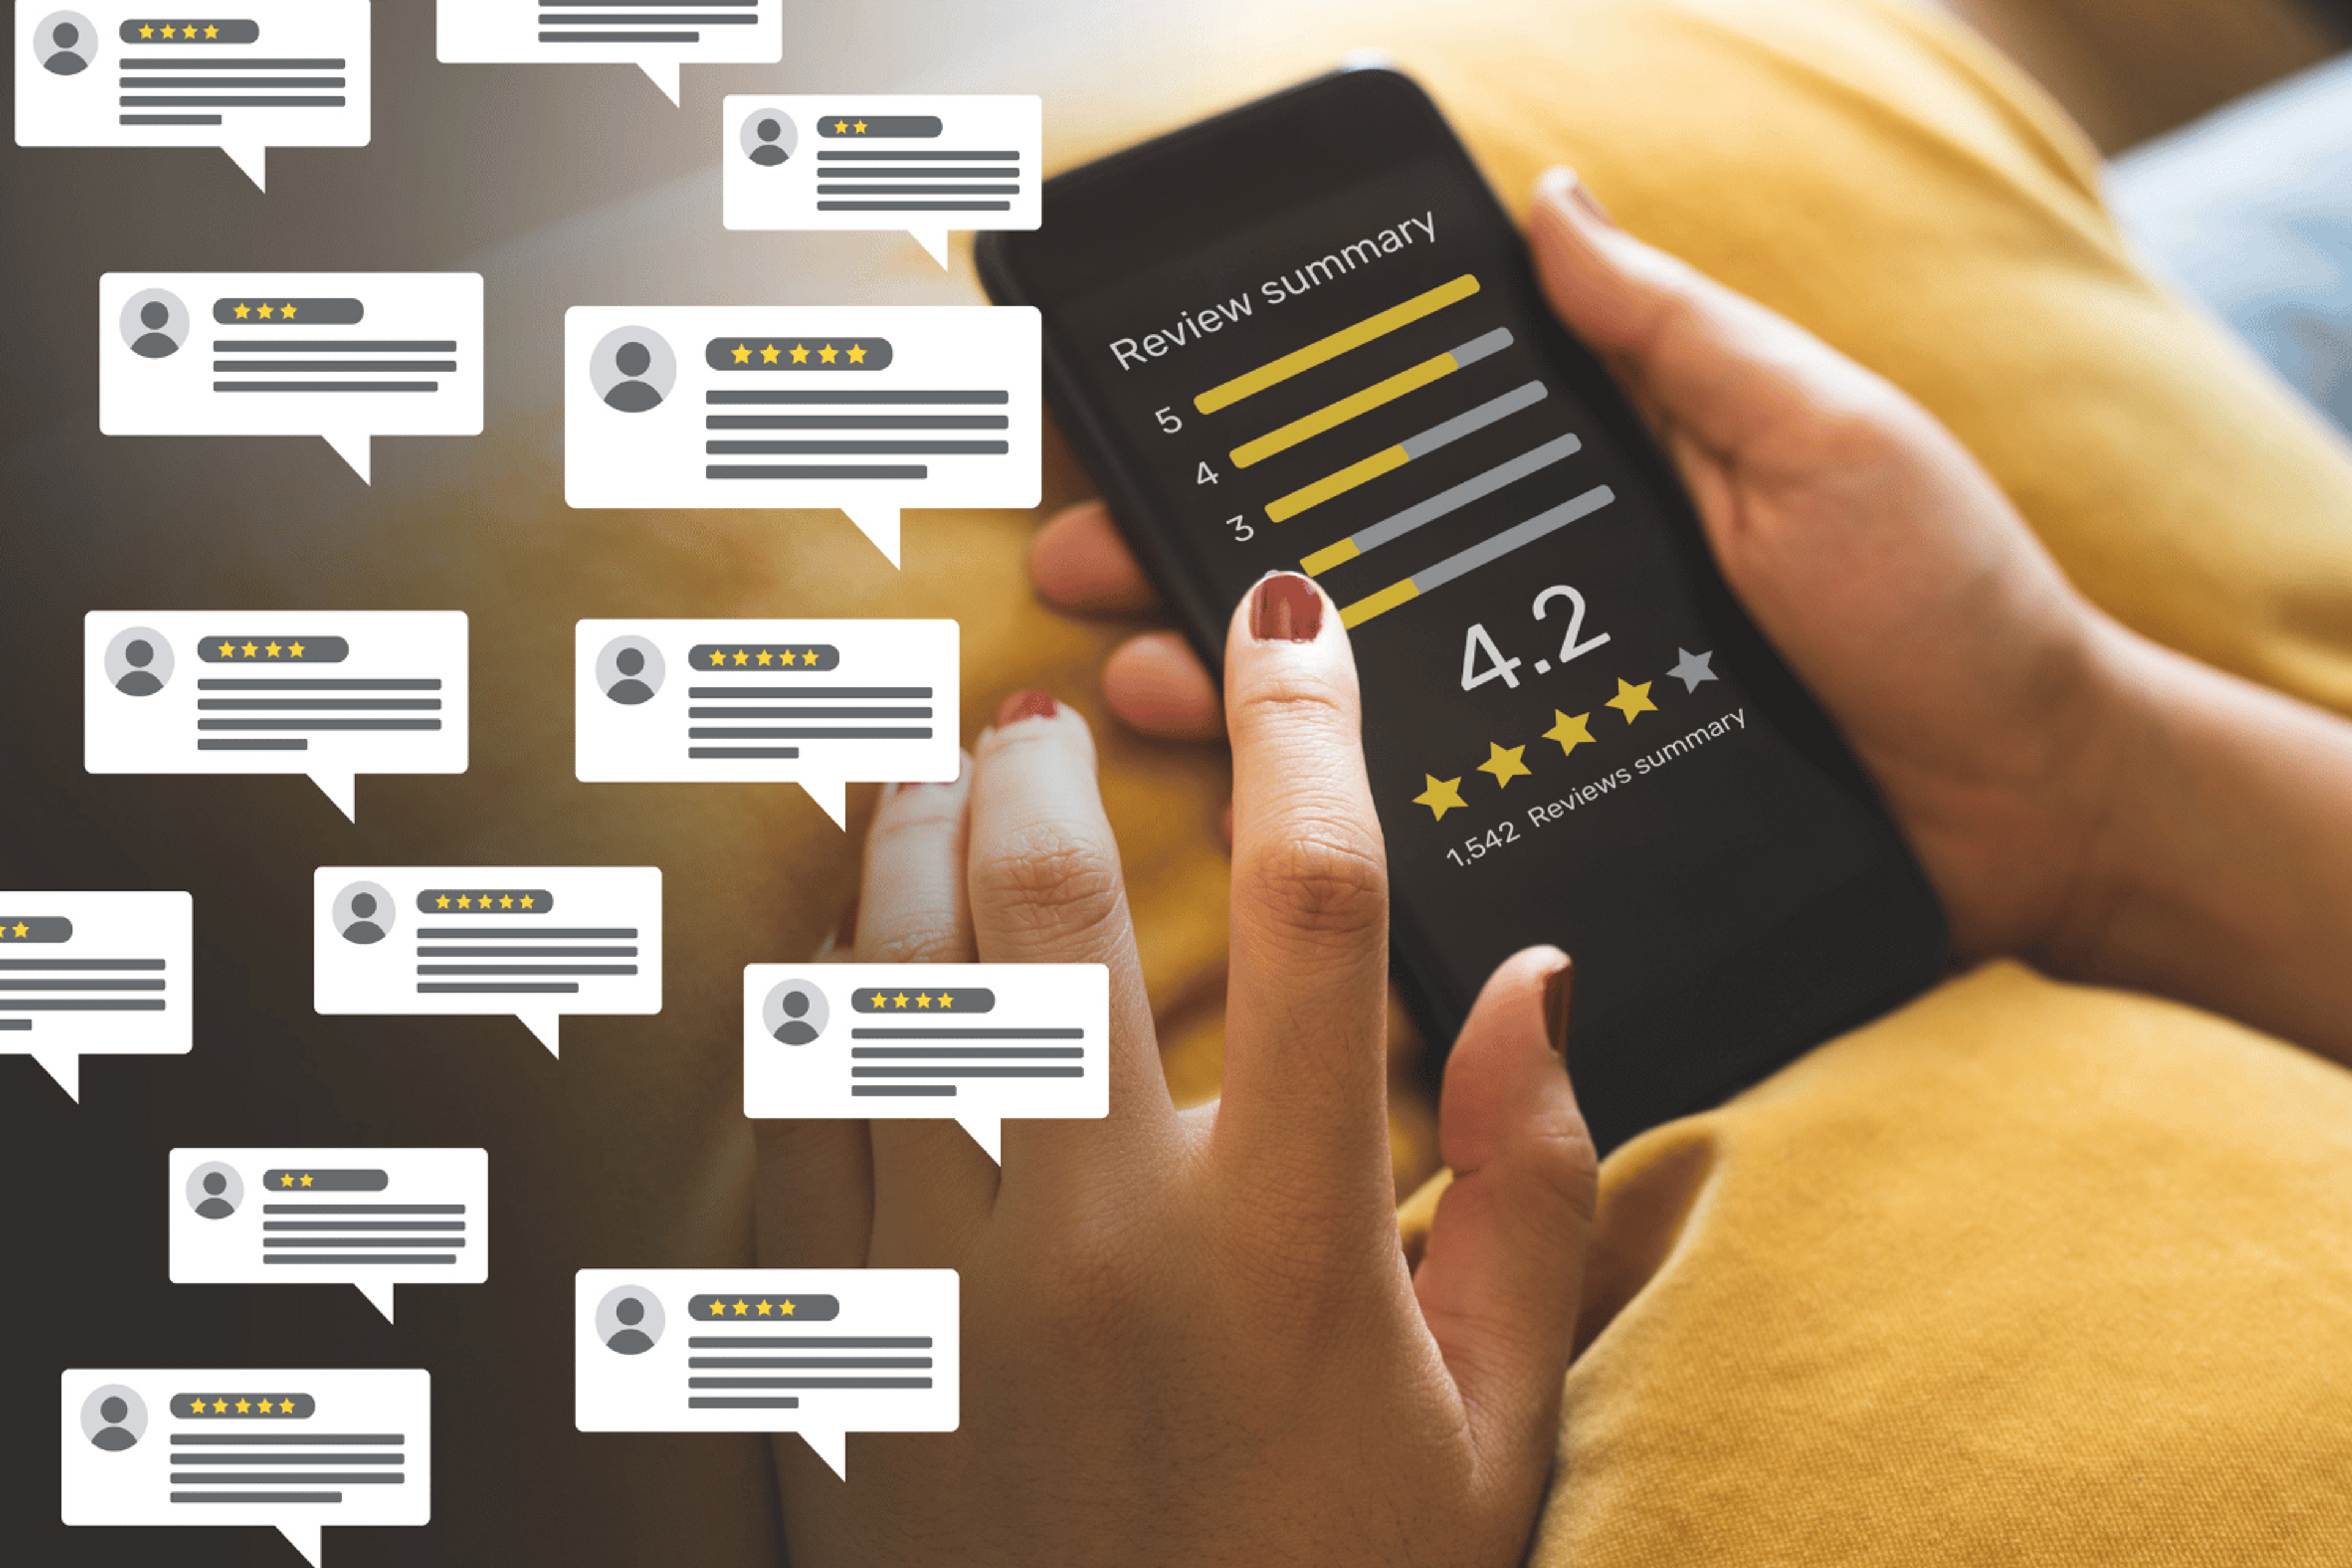 Building Trust, Driving Sales: The Significance of Product Reviews in E-commerce